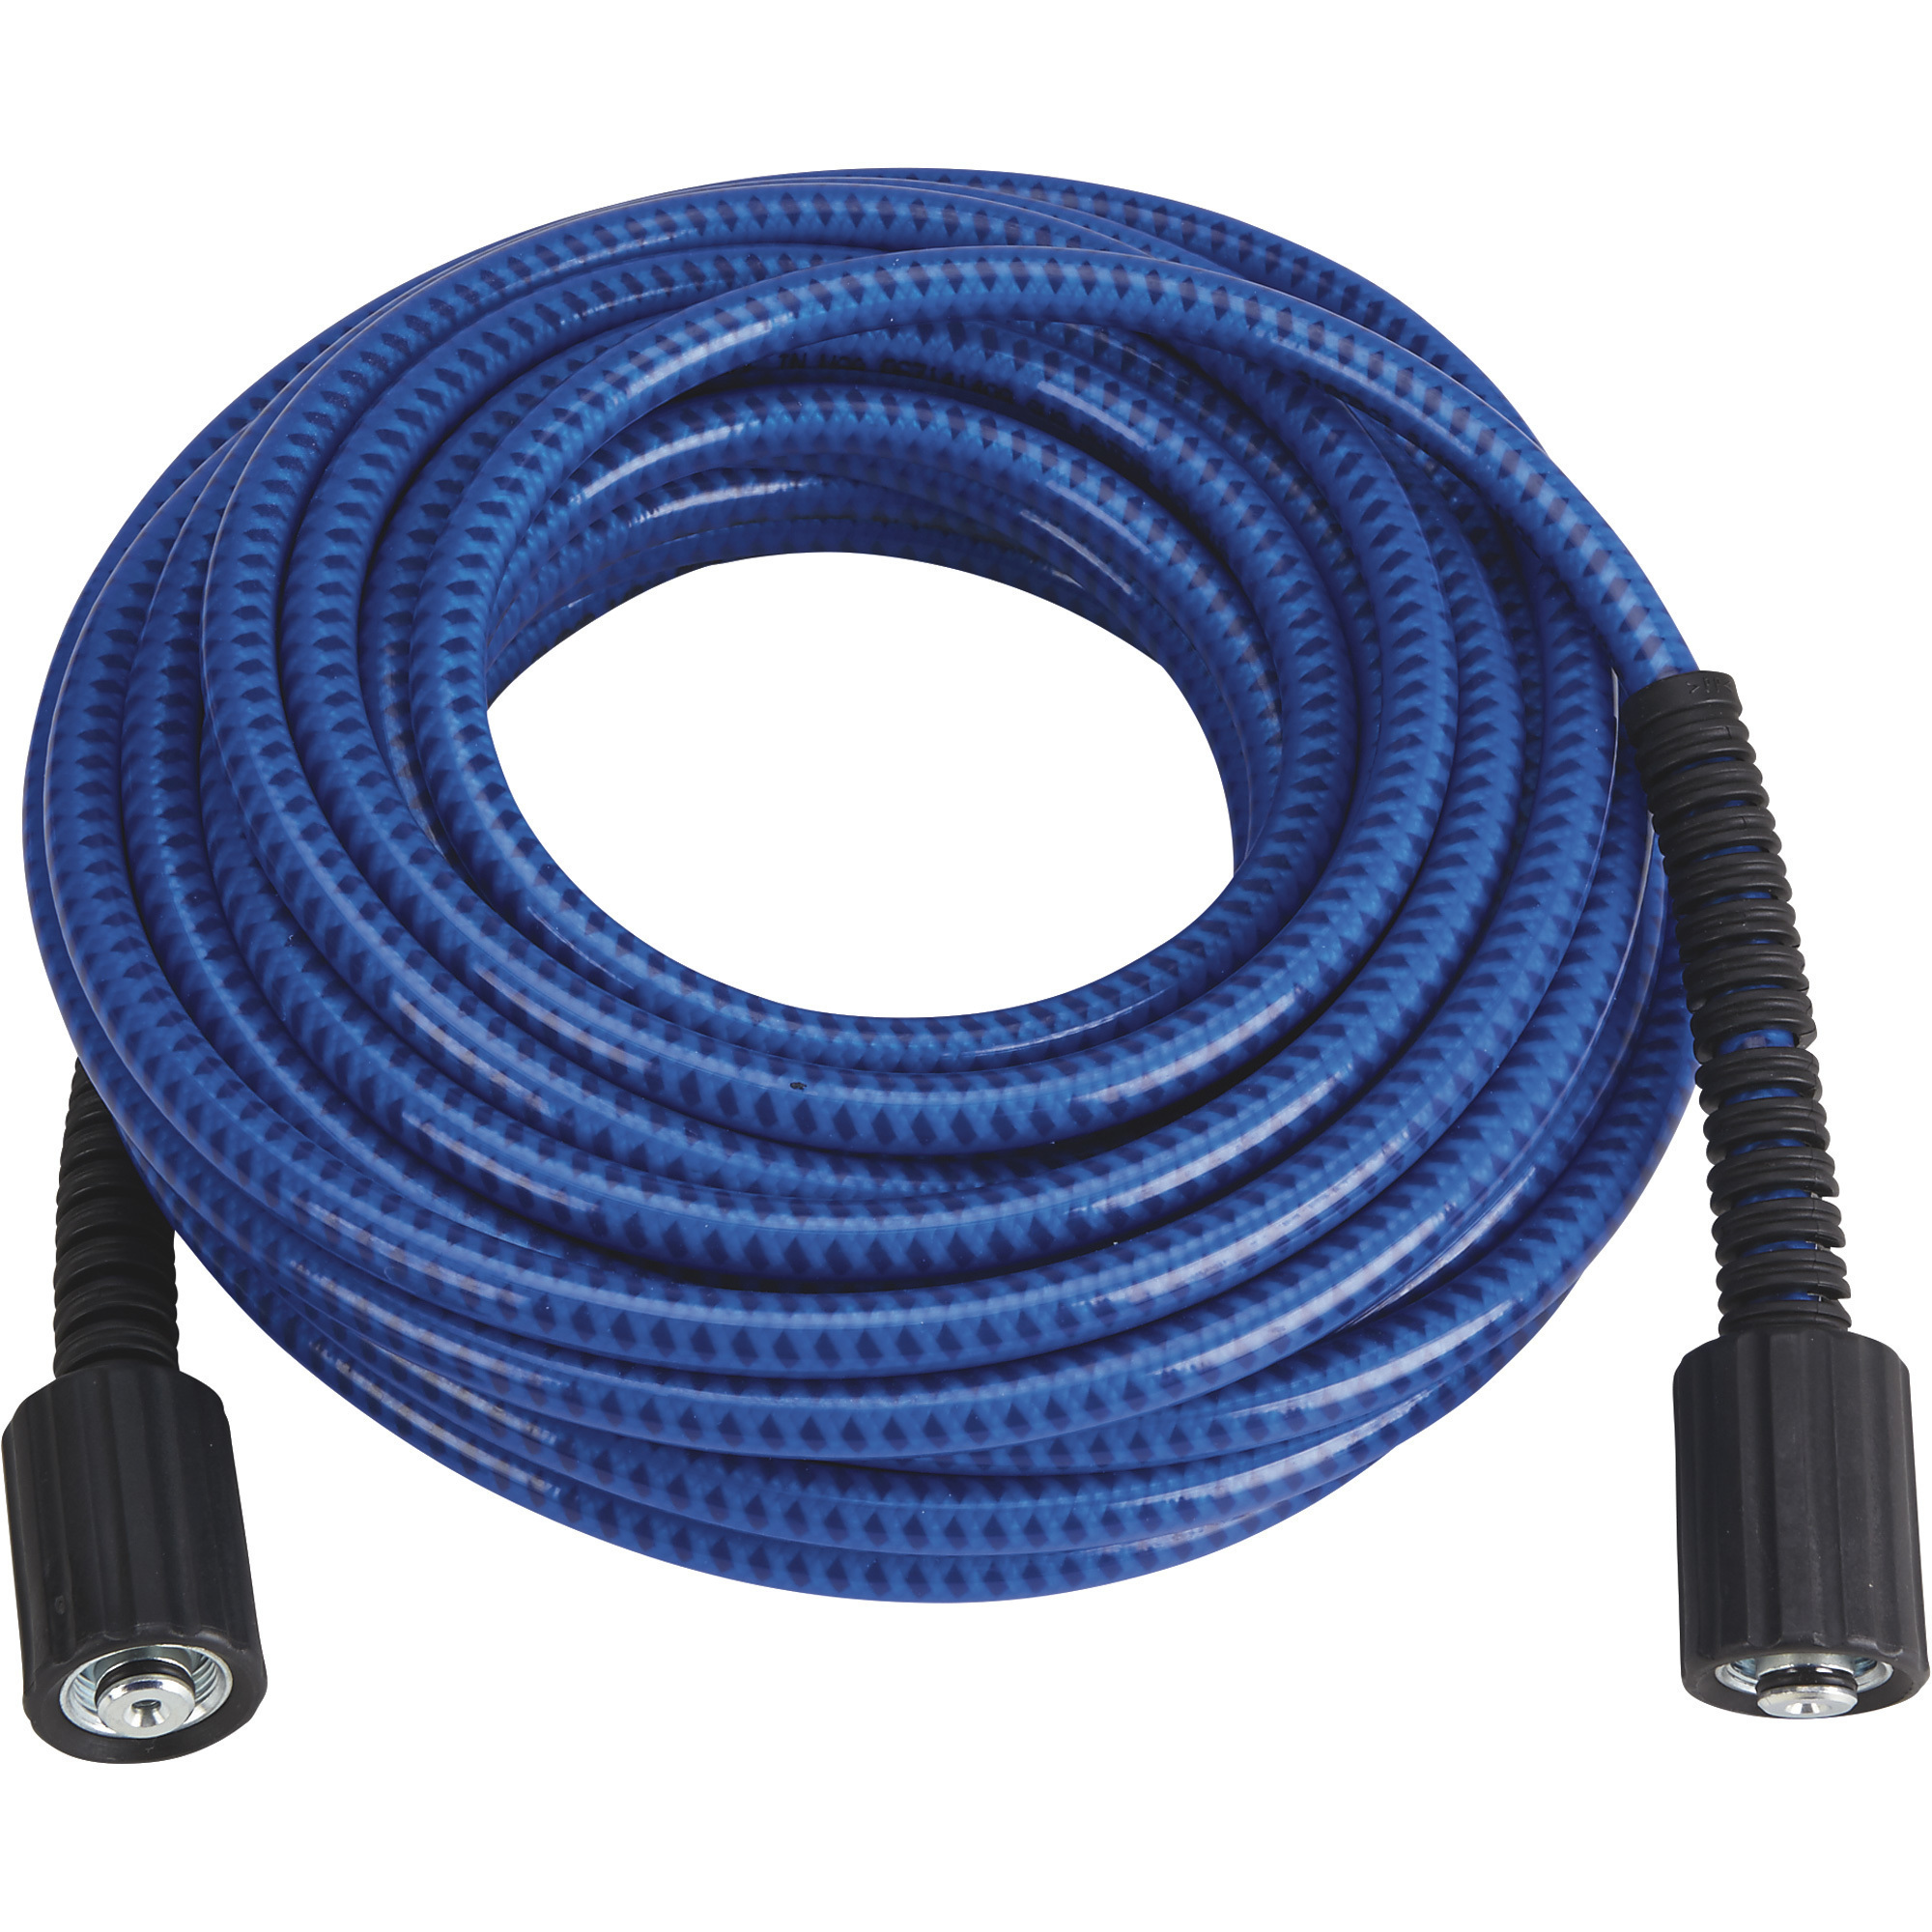 Powerhorse Nonmarking Pressure Washer Hose - 3100 PSI 50ft. x 1/4Inch Model 646200514